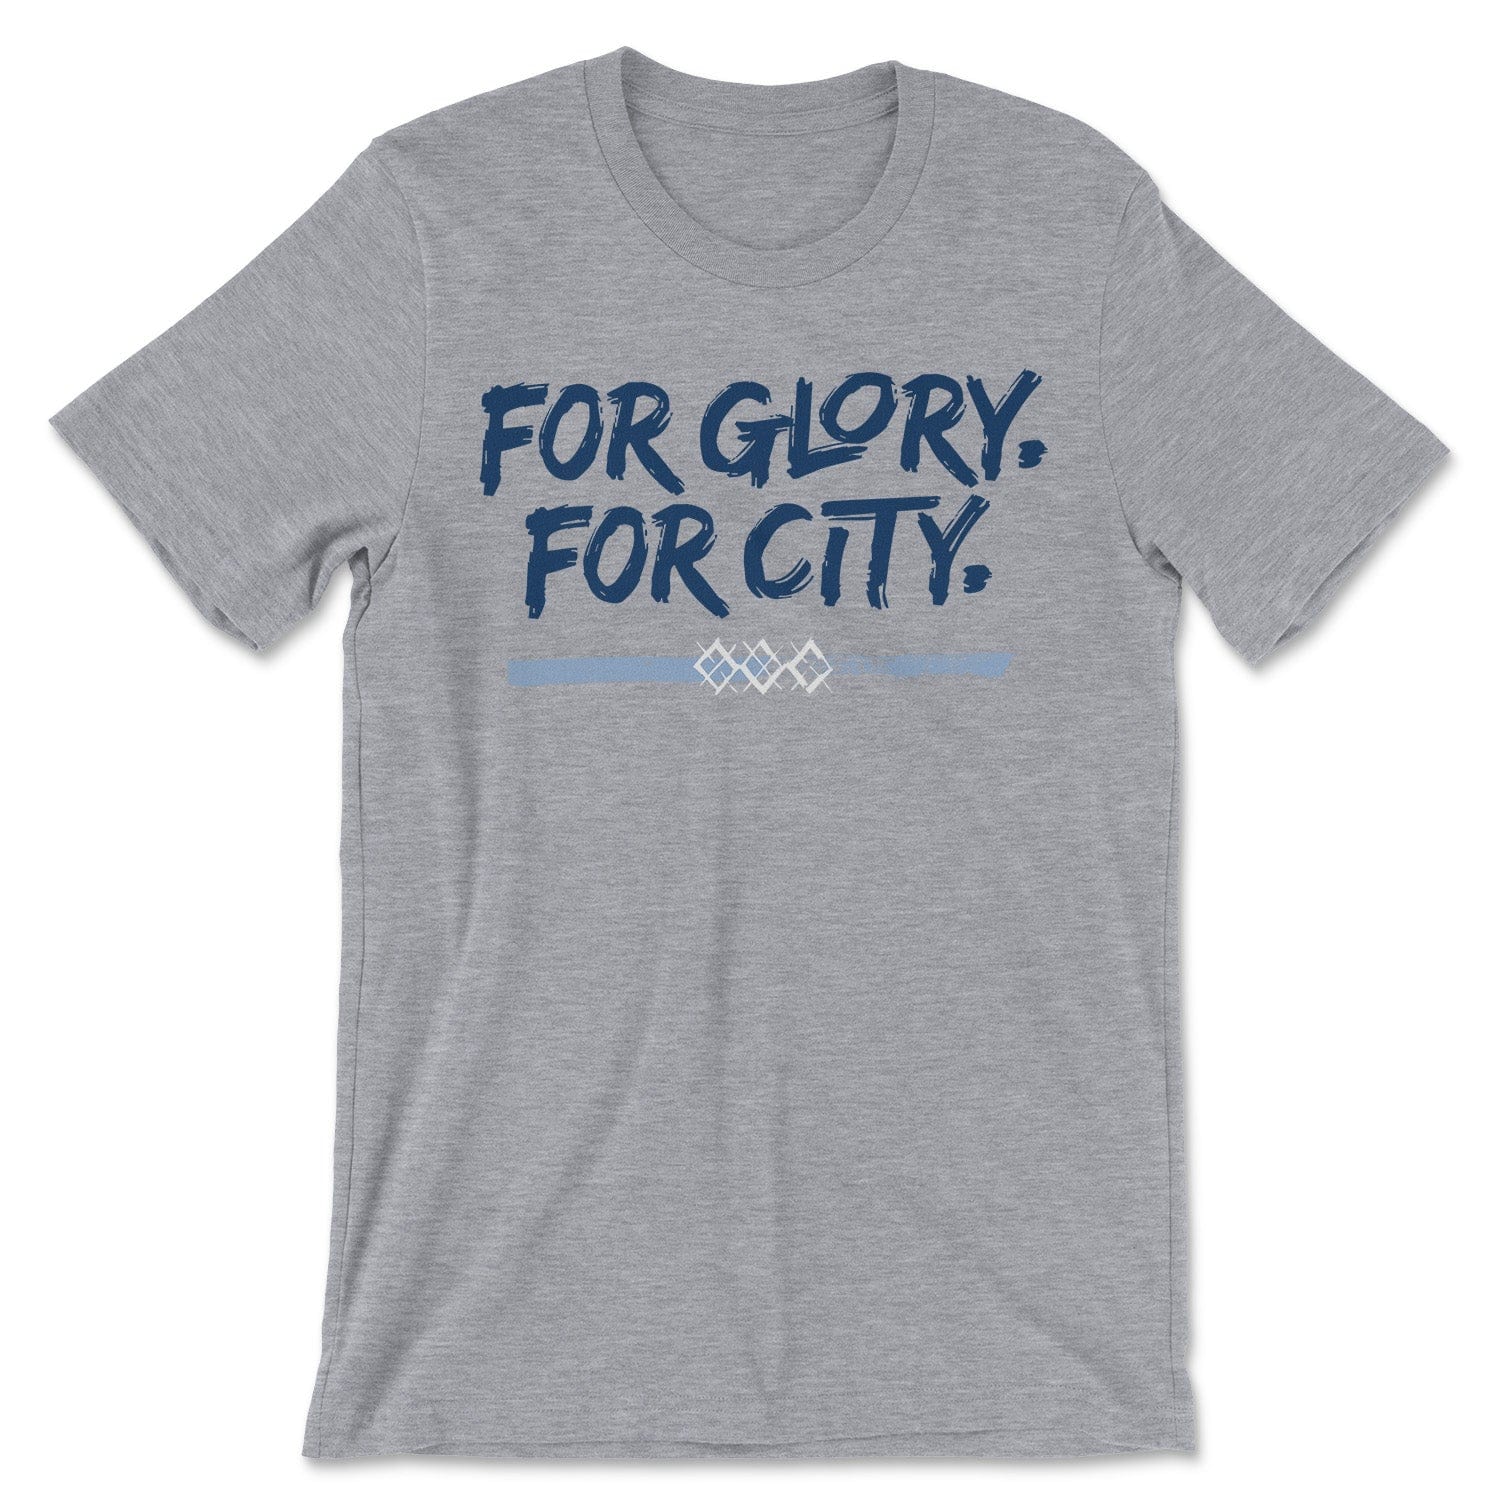 KC Swag Sporting Kansas City navy, powder, white FOR GLORY FOR CITY on athletic heather grey unisex t-shirt 